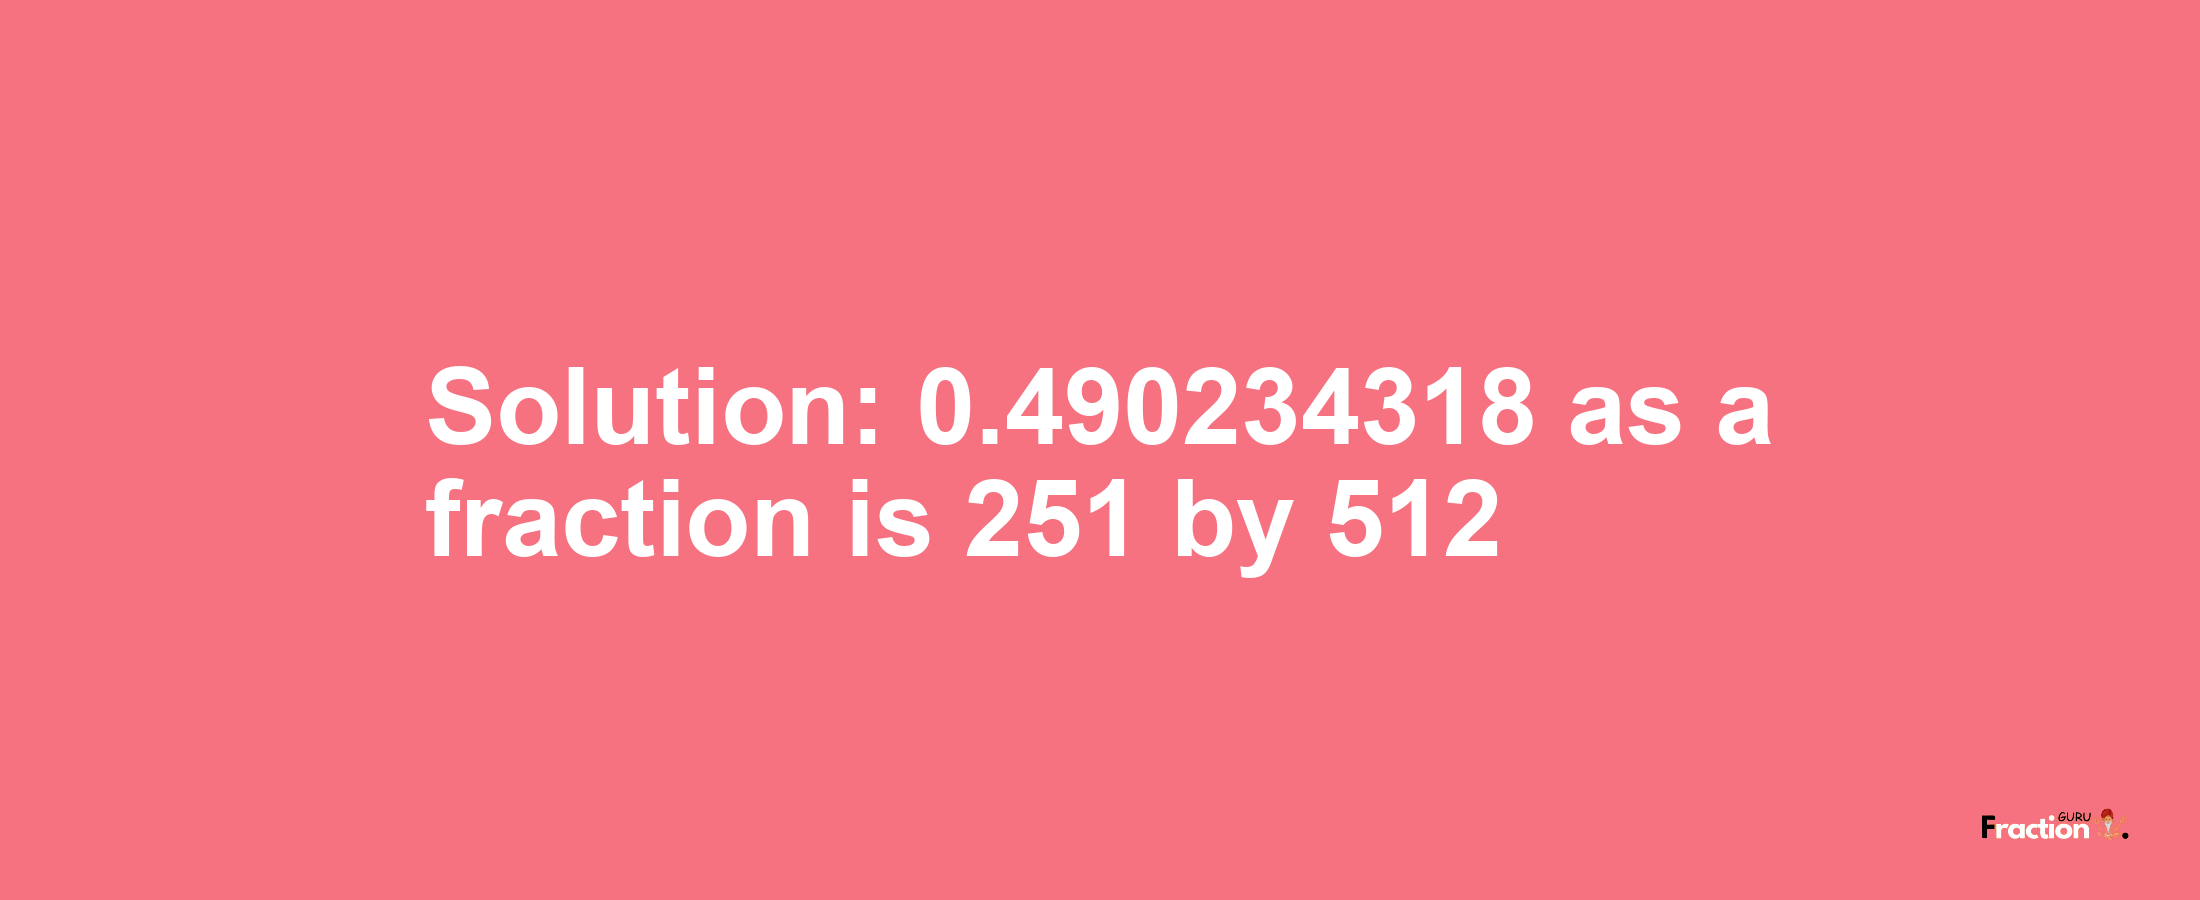 Solution:0.490234318 as a fraction is 251/512